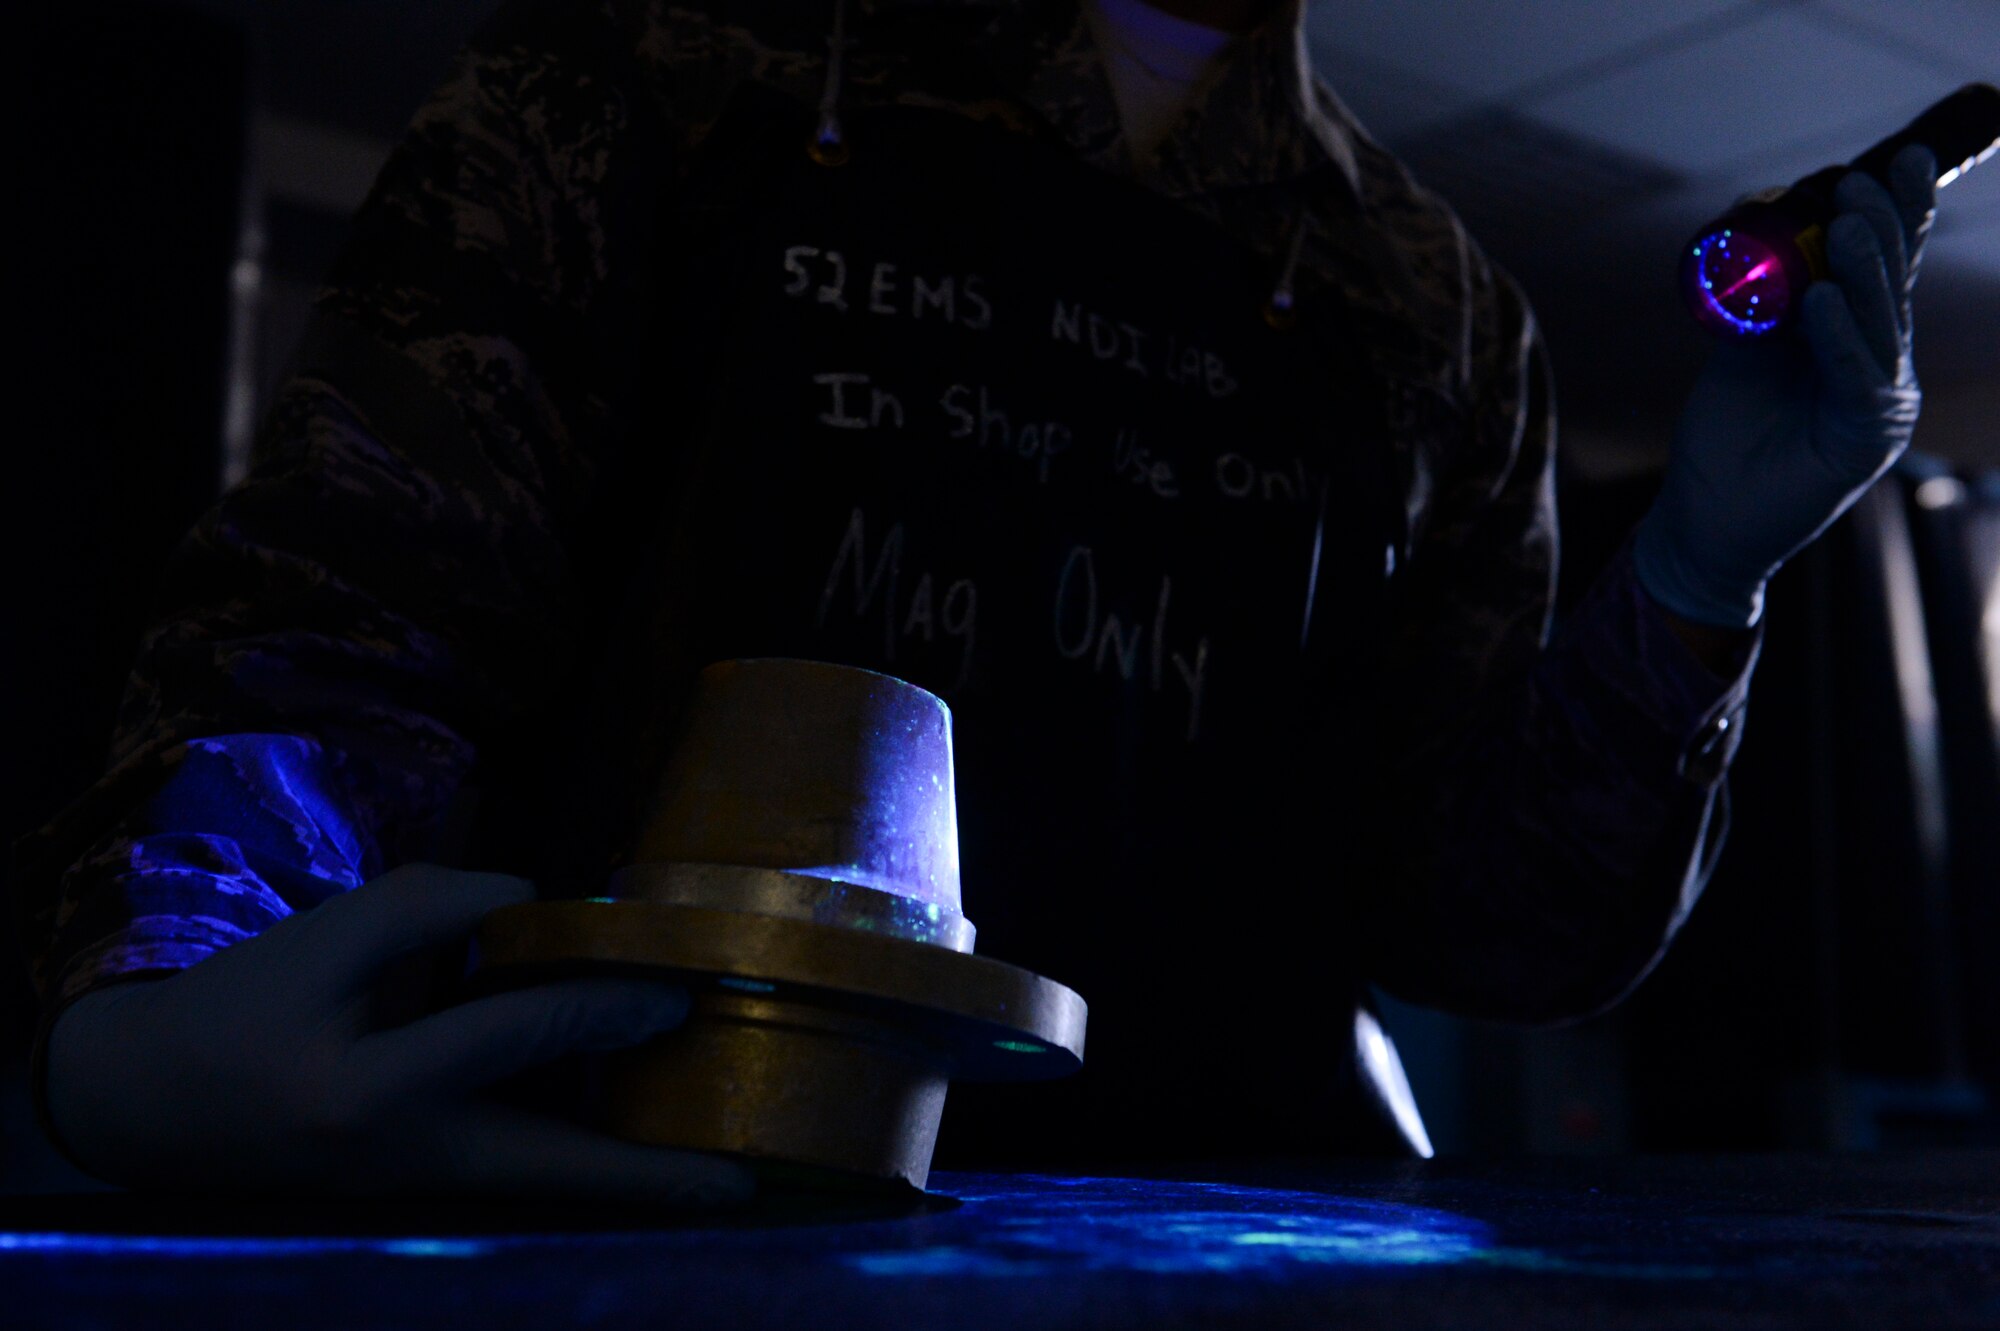 U.S. Air Force Airman 1st Class Christopher Garcia, a 52nd Equipment Maintenance Squadron non-destructive inspection apprentice from Tucson, Ariz., inspects a training part March 7, 2014, at Spangdahlem Air Base, Germany. Airmen of the NDI lab train continuously to stay proficient at detecting small cracks in aircraft parts.  (U.S. Air Force photo by Senior Airman Rusty Frank/Released)